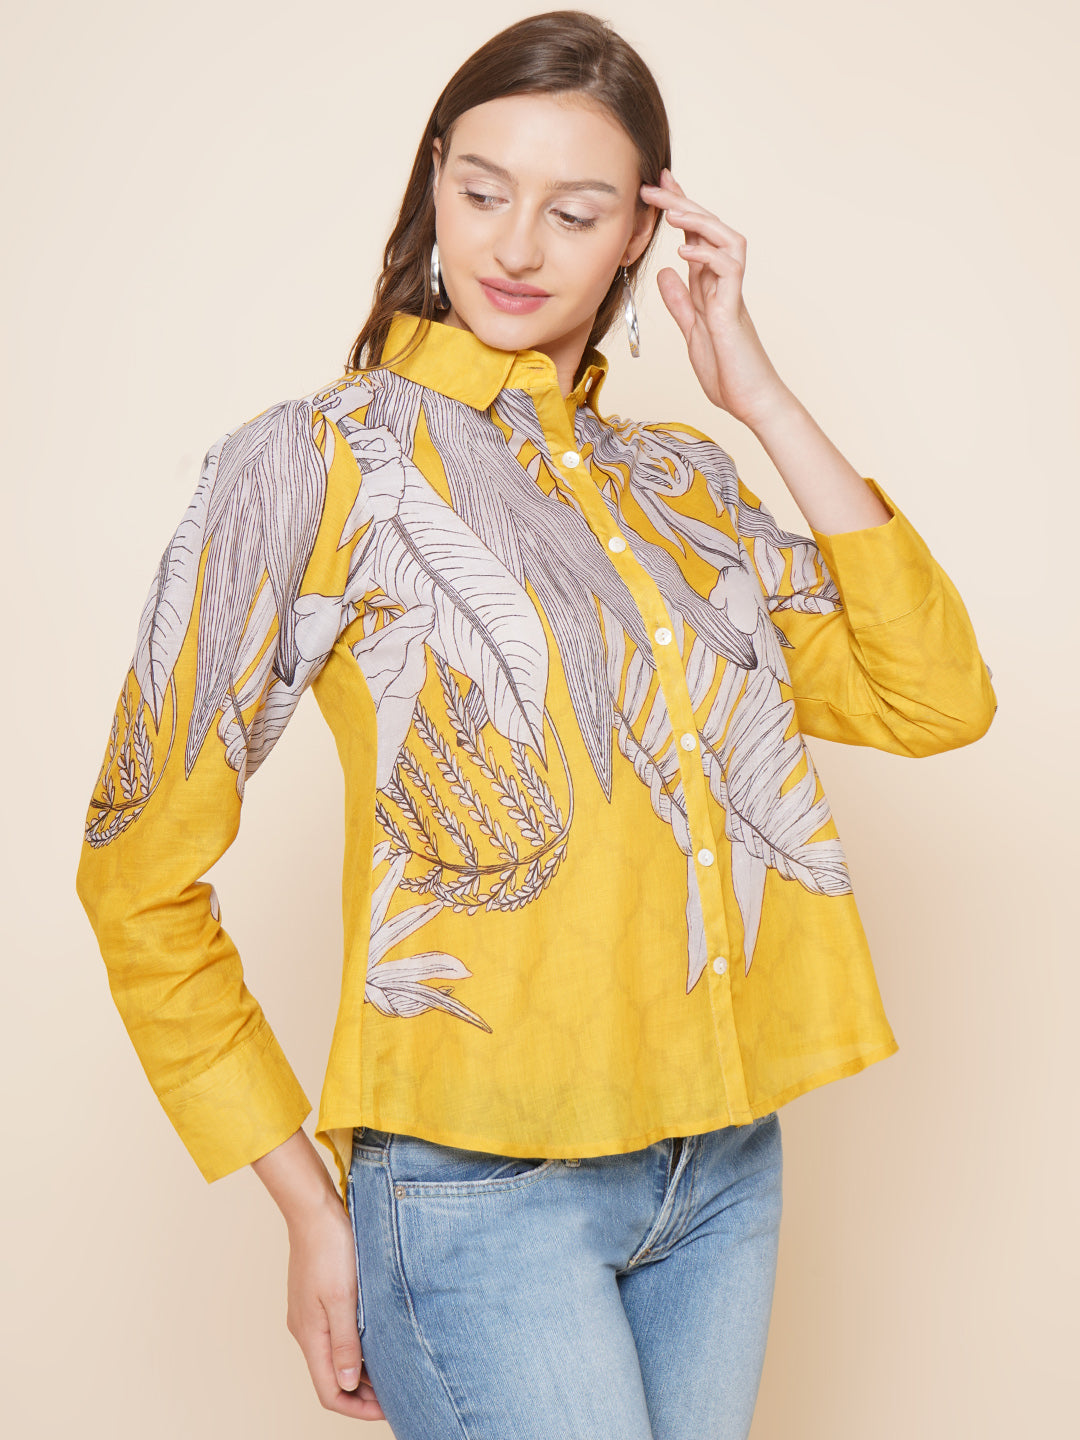 Bhama Couture Yellow & Grey Printed Shirt Style Top